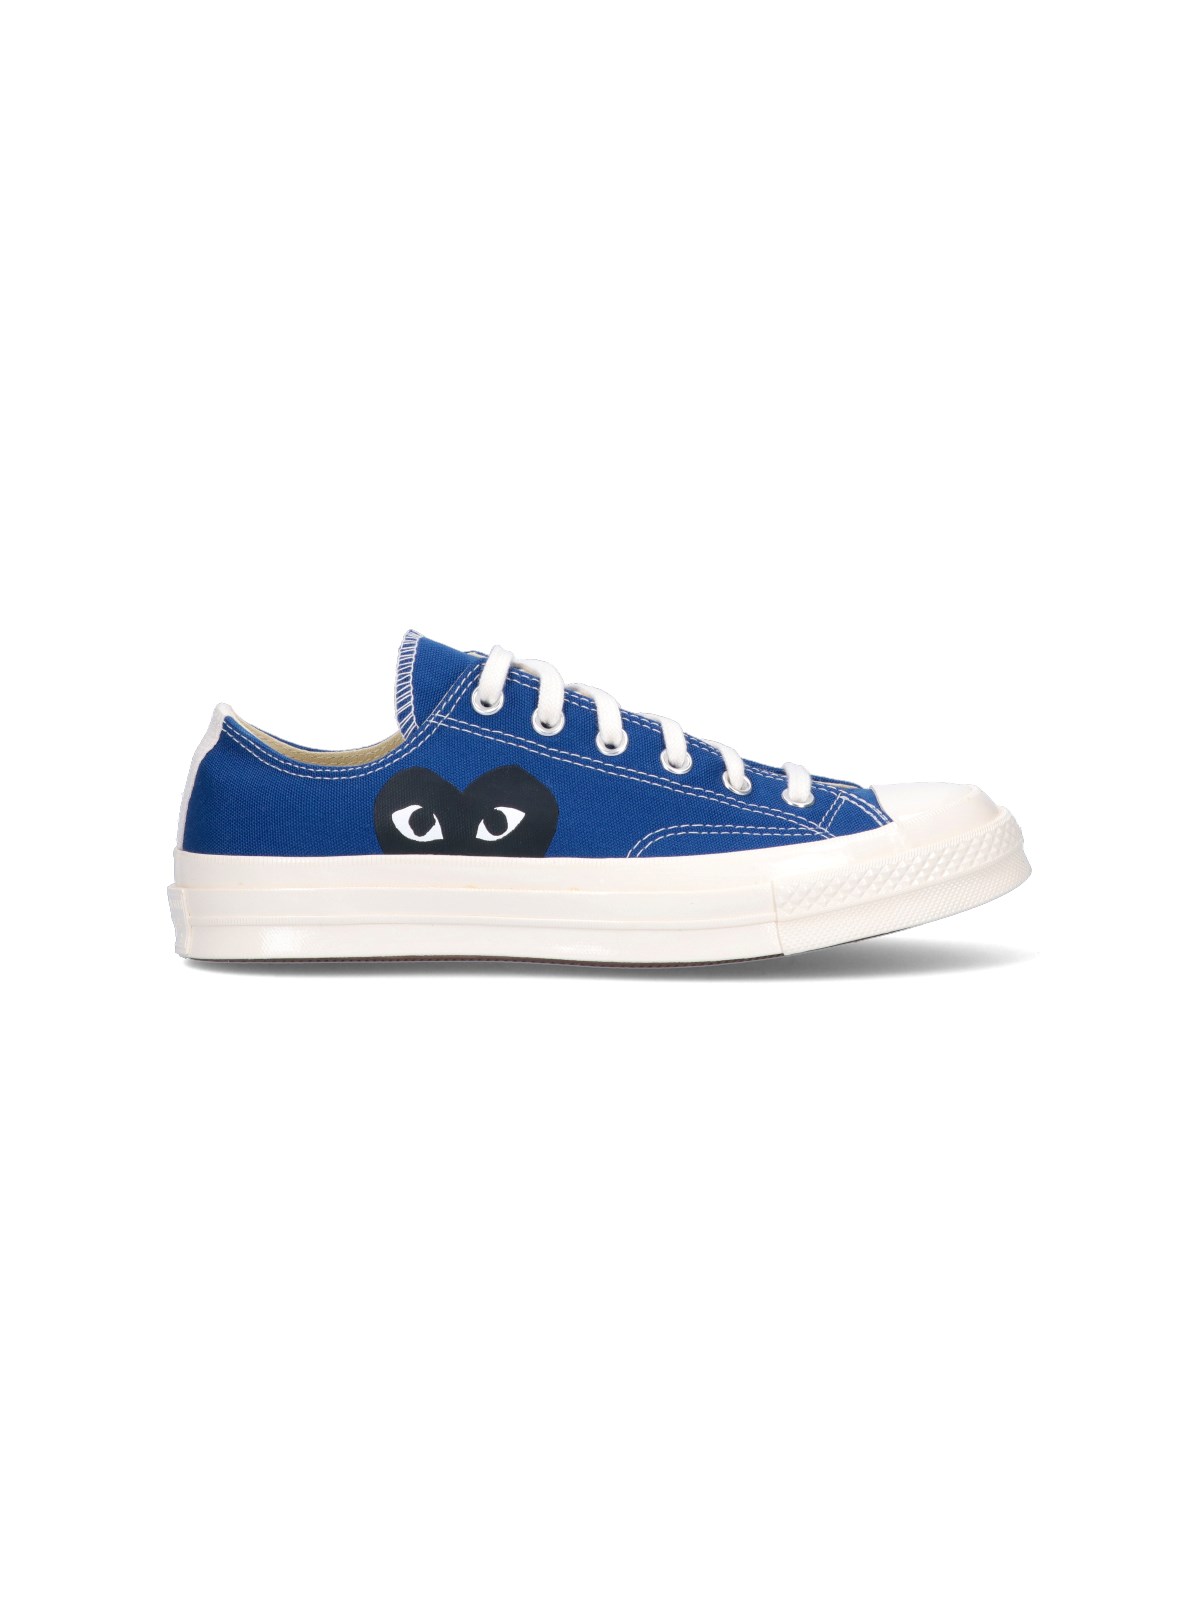 Comme Des Garçons Play X Converse Chuck Taylor Canvas Low-top Sneakers In Blue